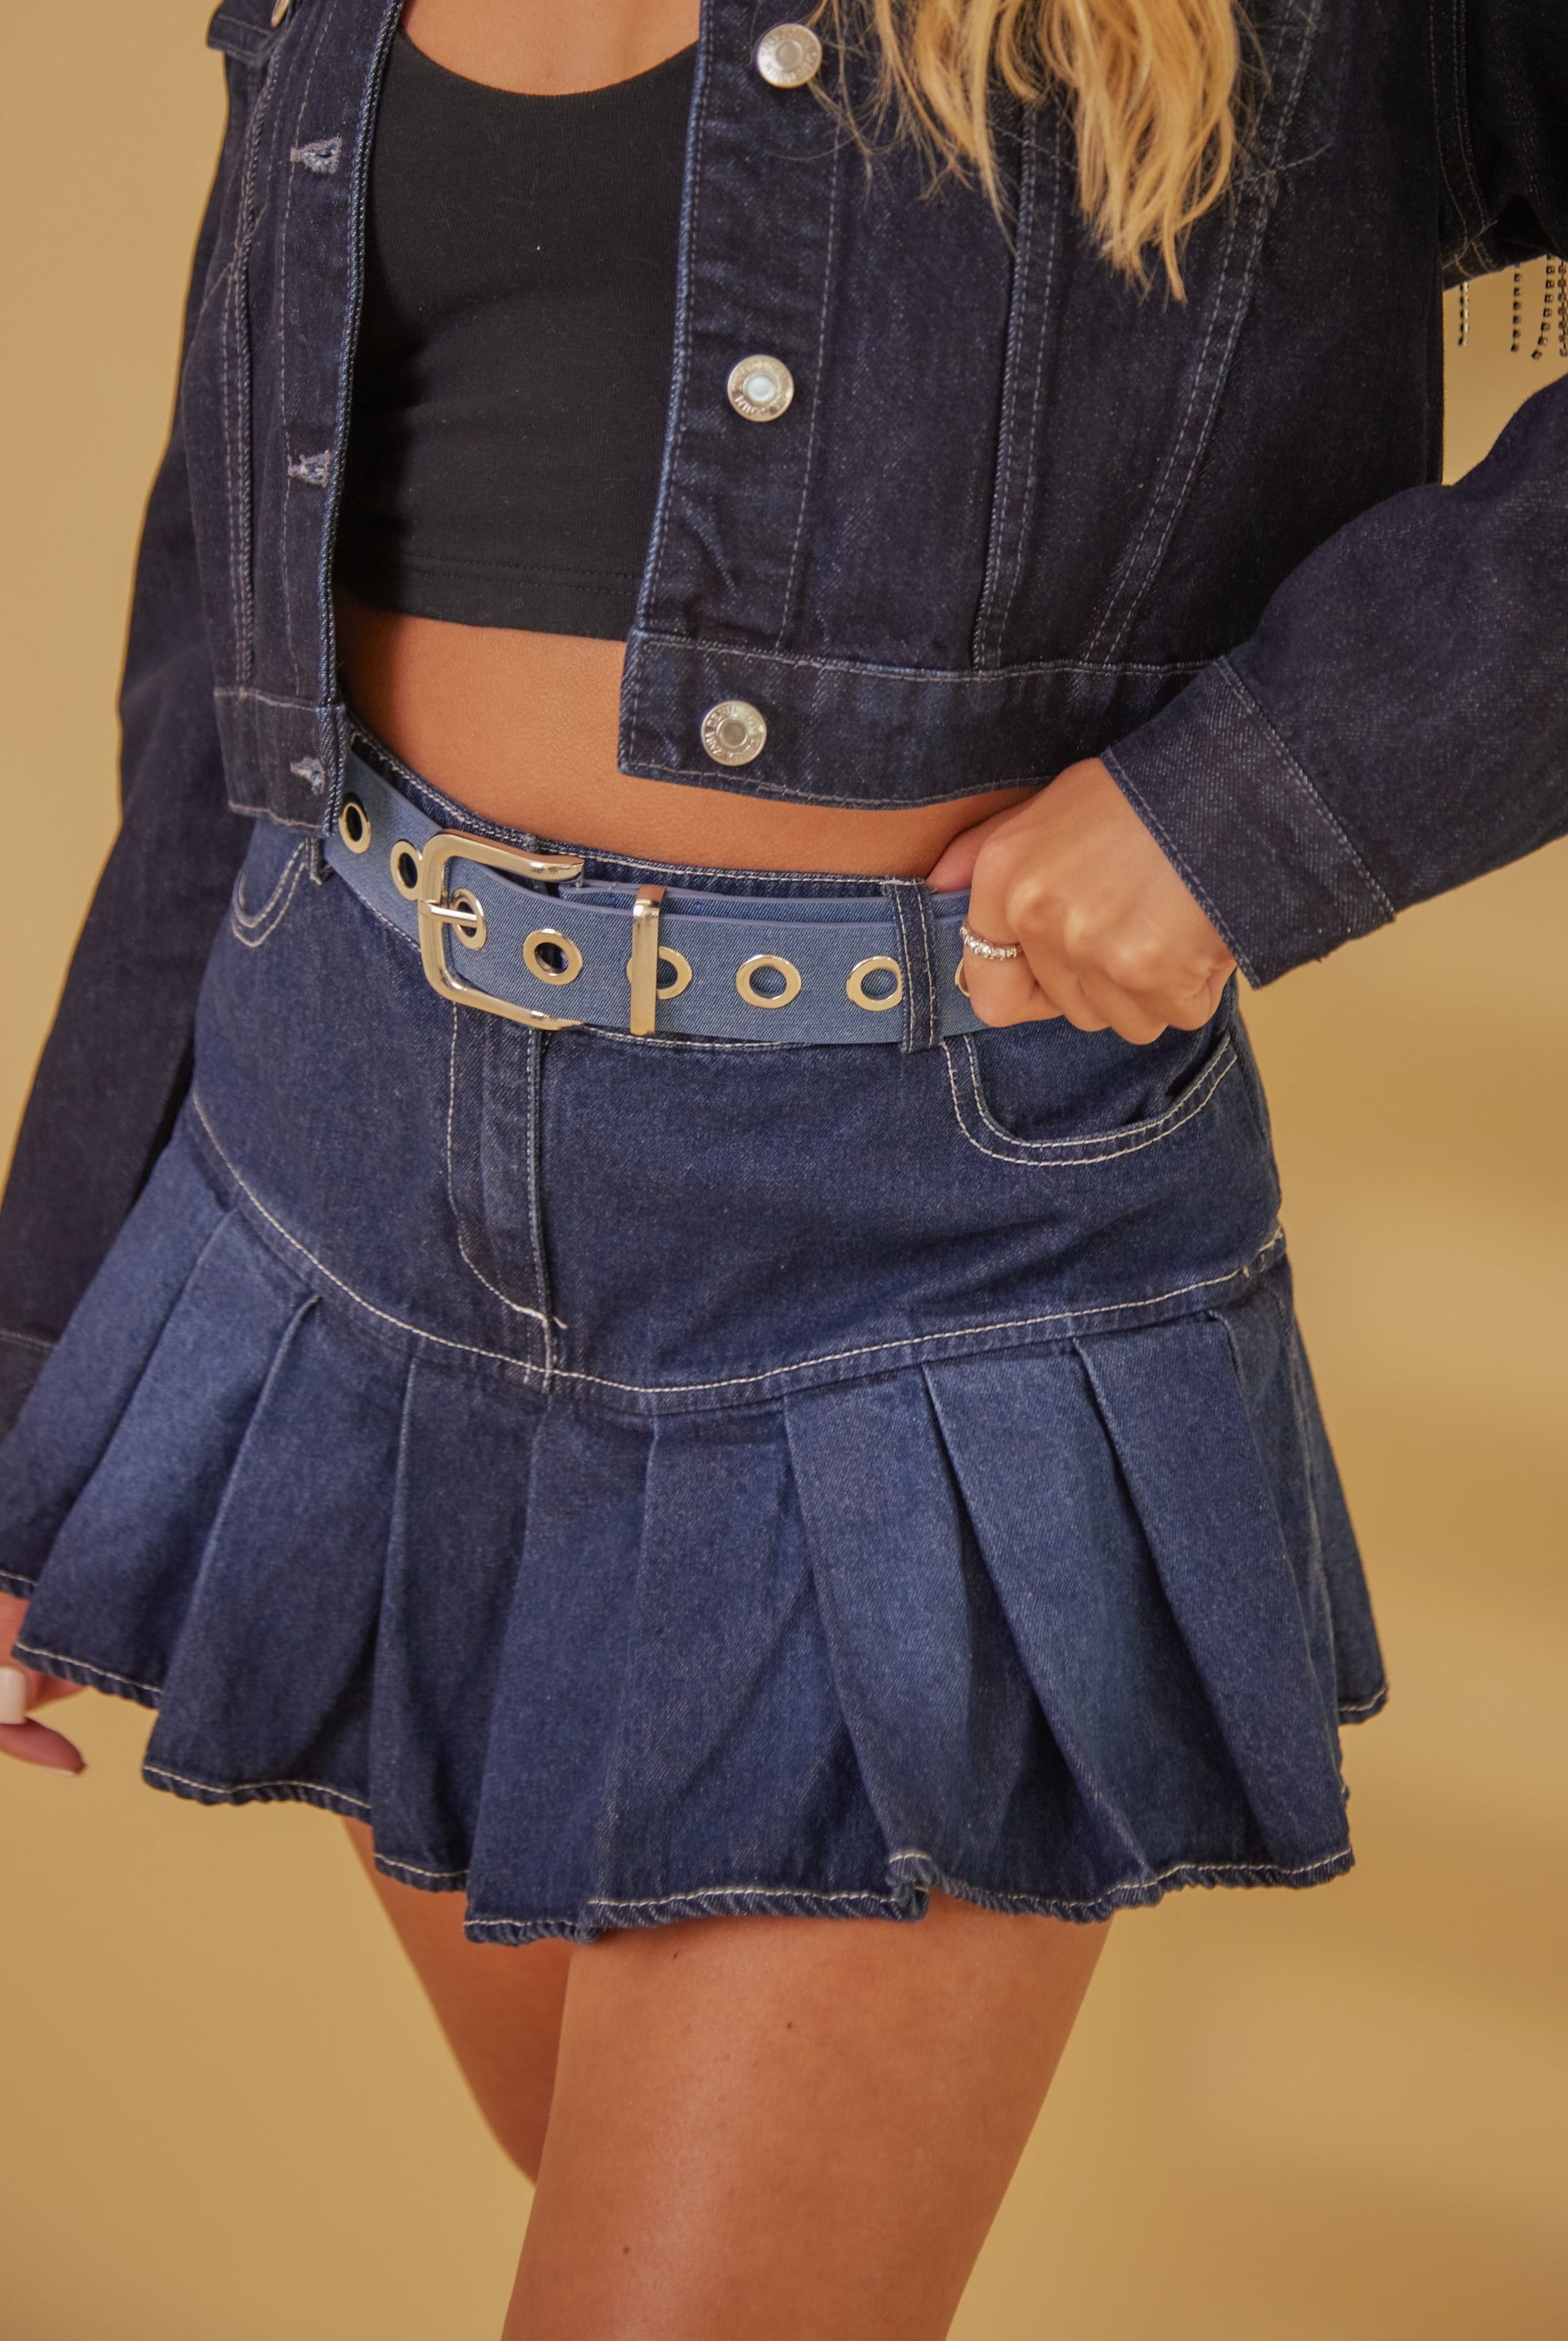 My Accessories London Denim Eyelet Belt in Blue | Accessory | Accessories | Y2K | Retro | Glam | Adjustable | Women's | Going out | Occasion |